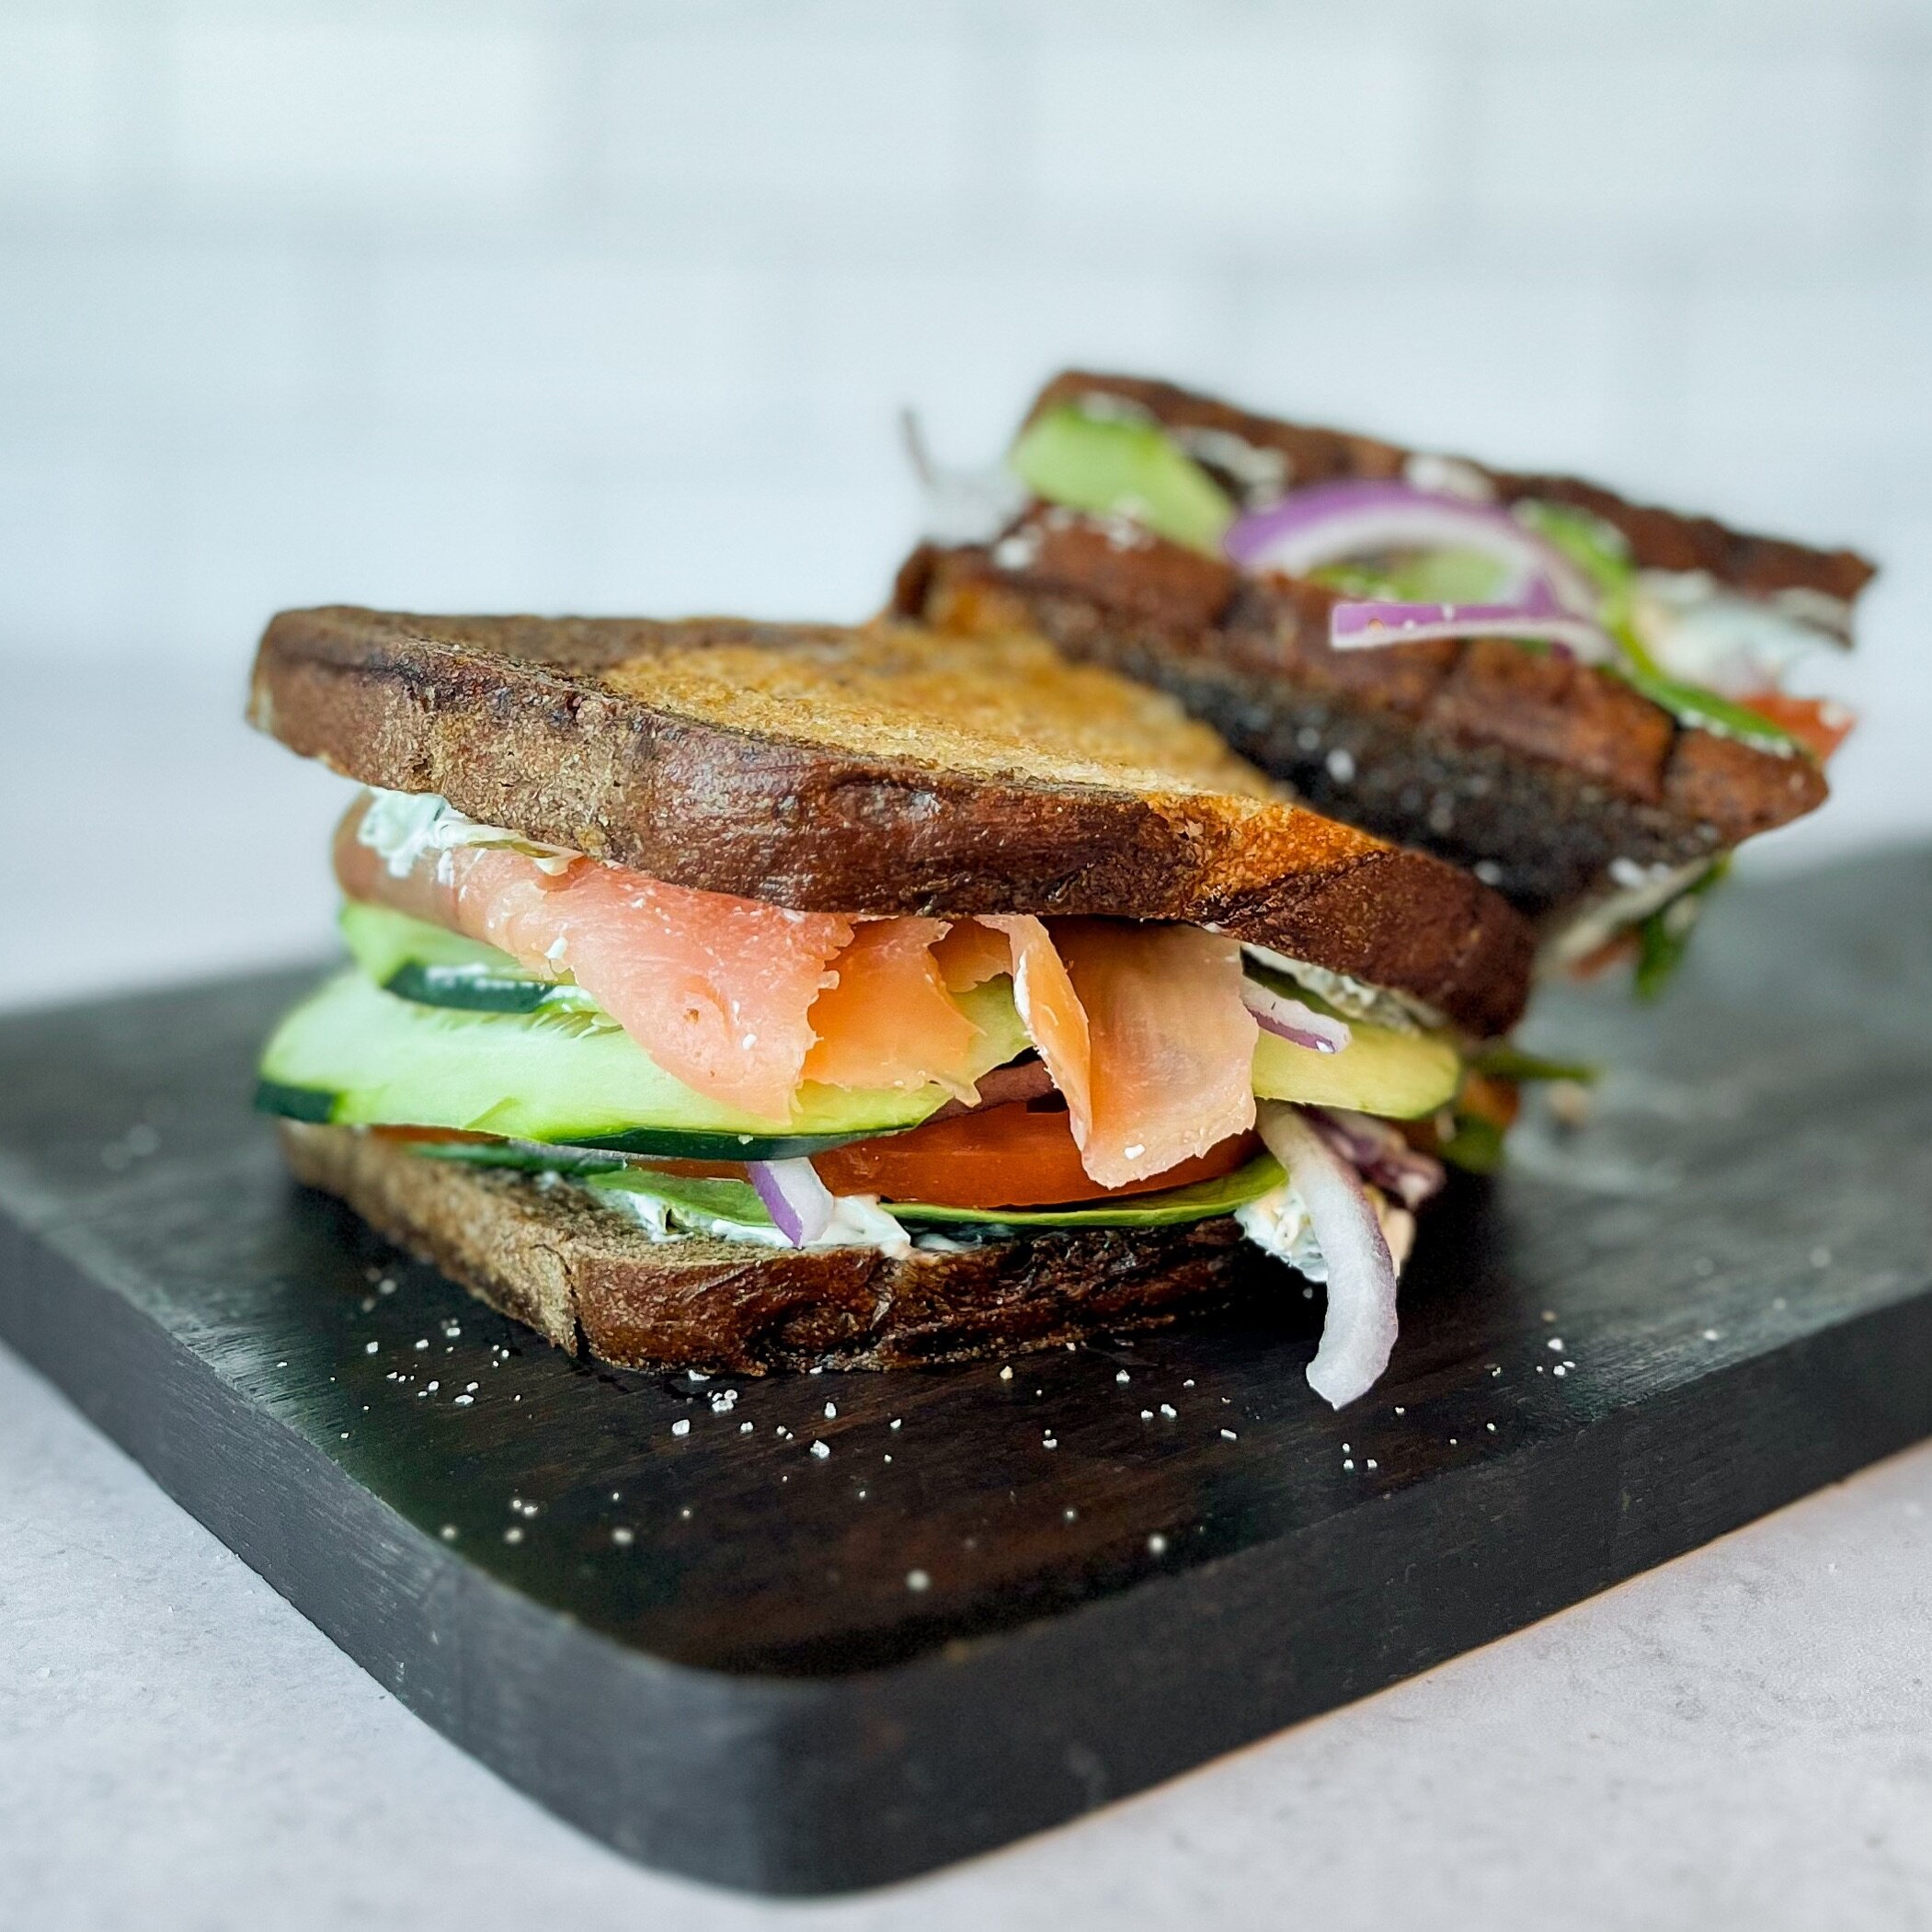 This smoked salmon on rye at the Wedge Parkway location is as fresh and delicious as it looks!! 🥒🍅
Cold smoked lox with shaved red onion, sliced tomato, cucumbers, spinach, and lemon caper dill cream cheese spread served on toasted rye bread! #salm